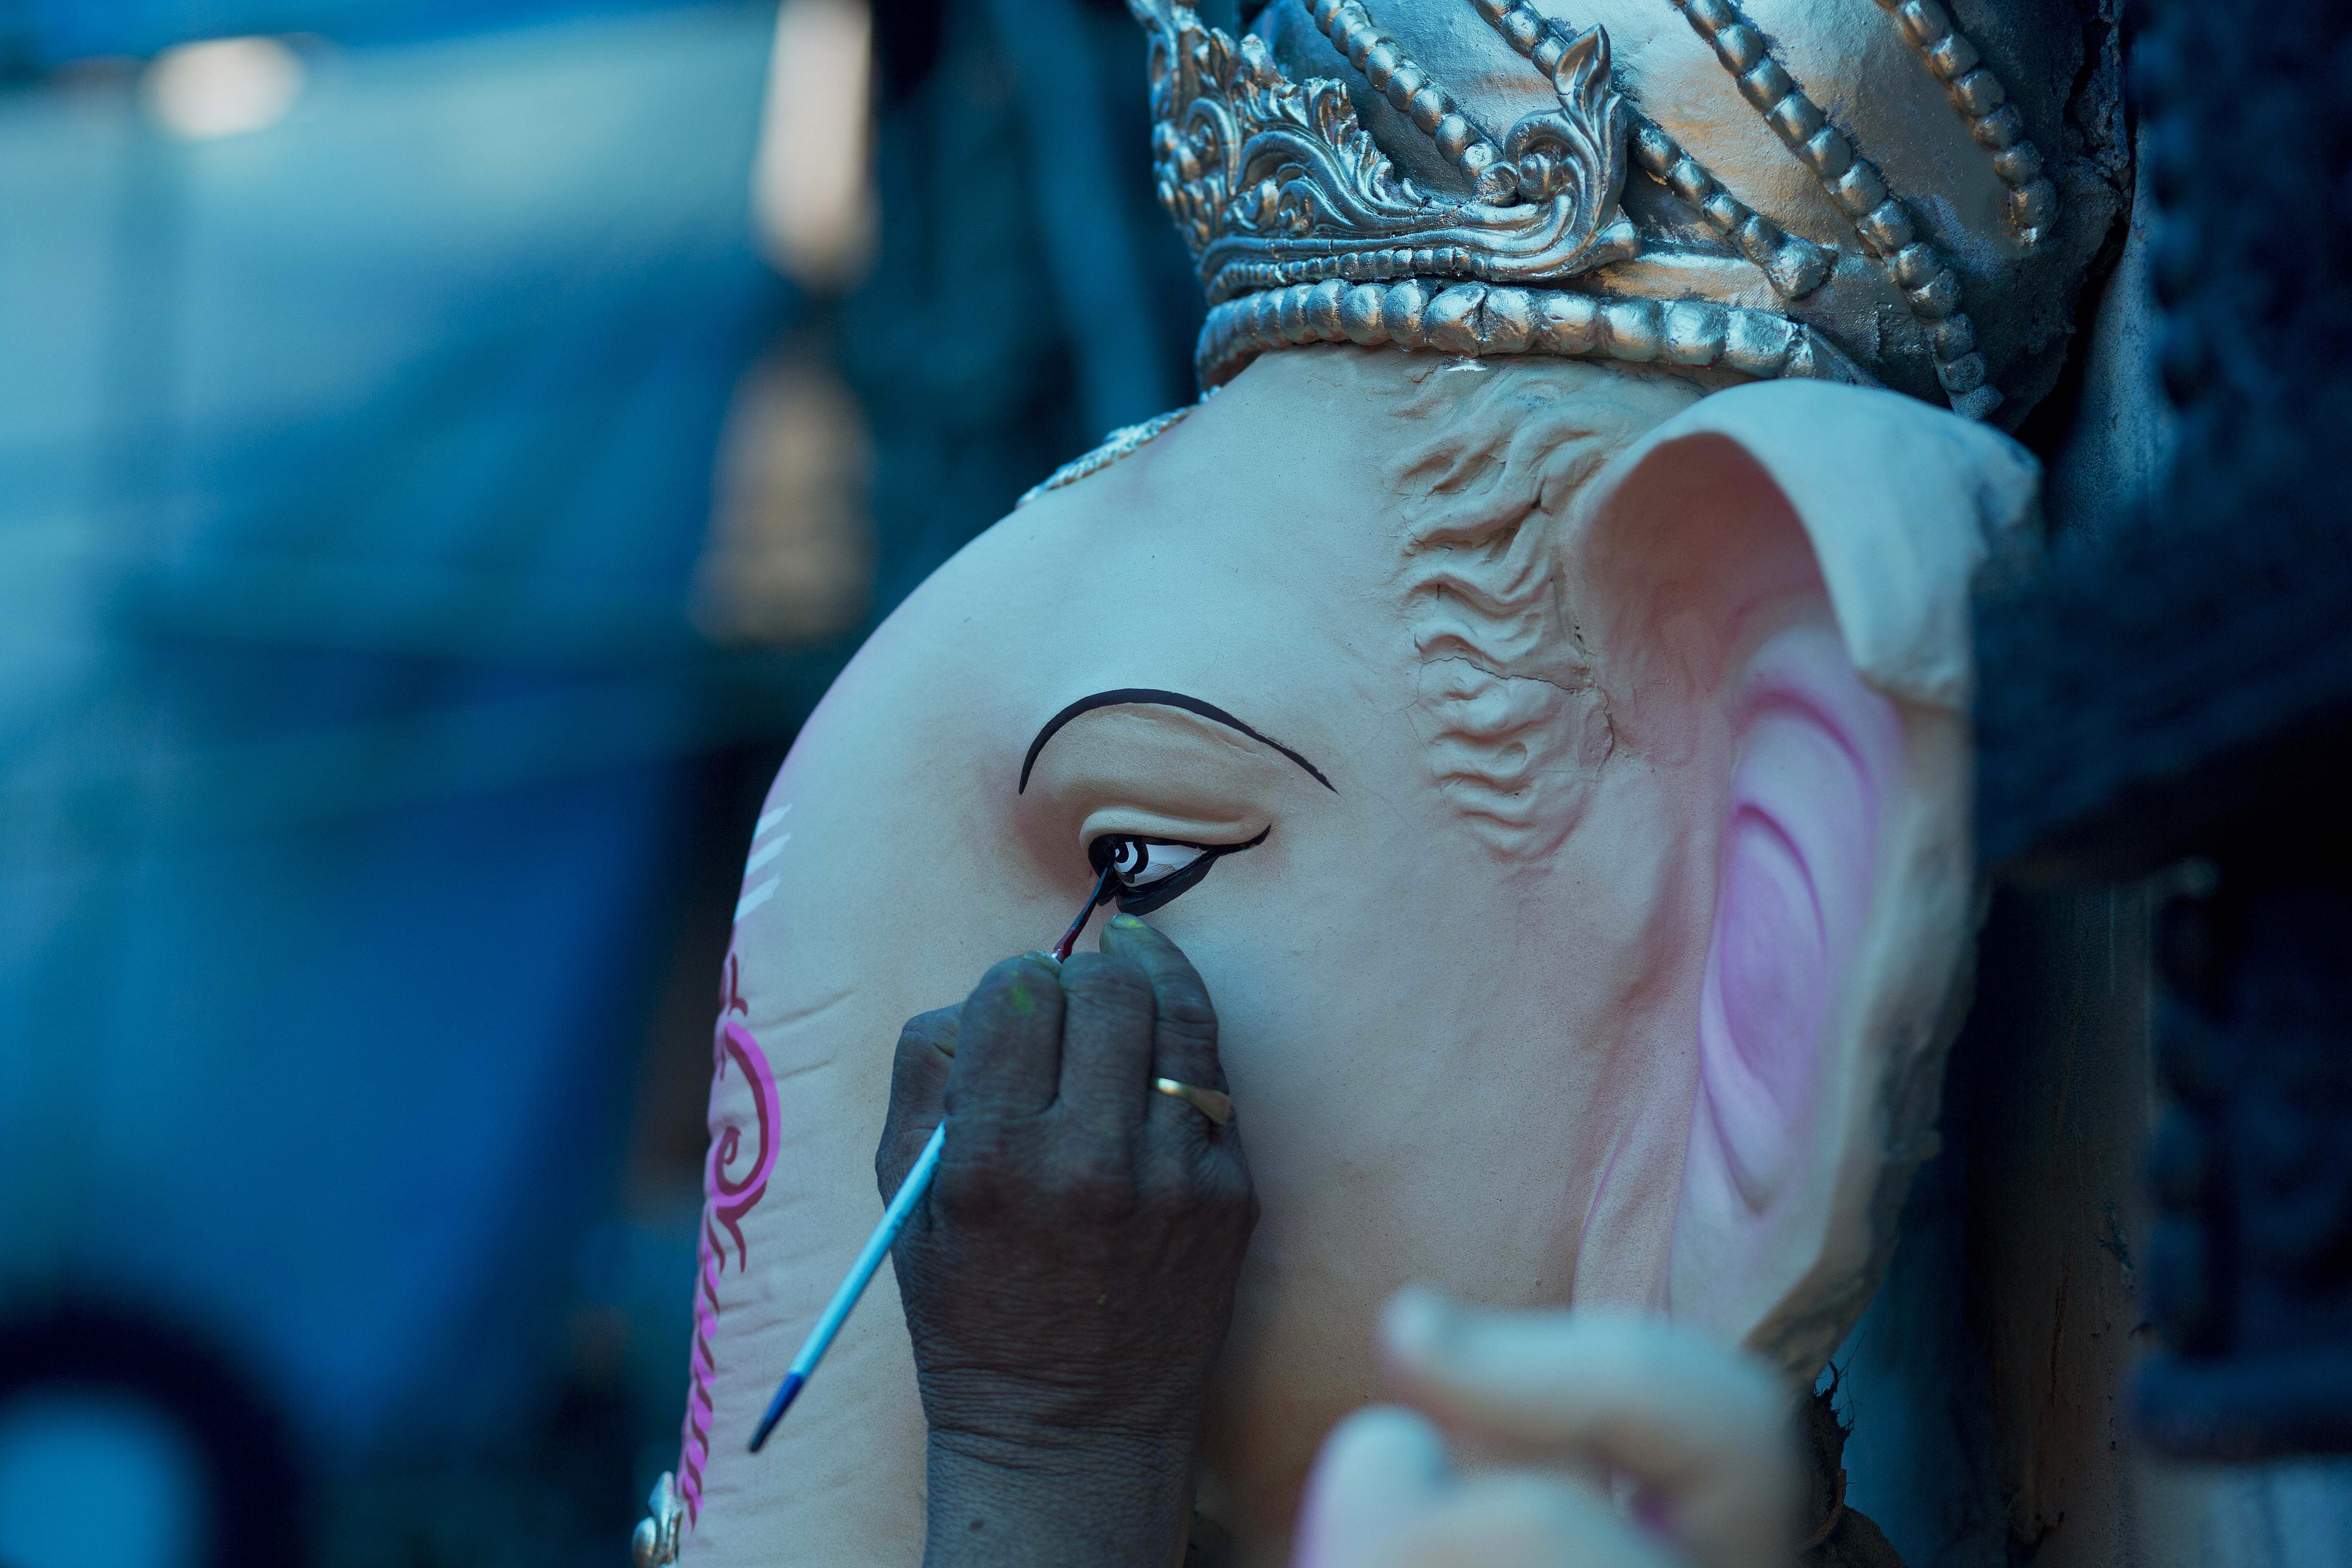 An artisan puts final touches on an idol of Hindu God Ganesha ahead of Ganesha Chaturthi at a workshop in Gauhati, India, Wednesday, Sept. 12, 2018. The ten-day long festival celebrating the birth of Ganesha begins Sept. 13. (AP Photo/Anupam Nath)